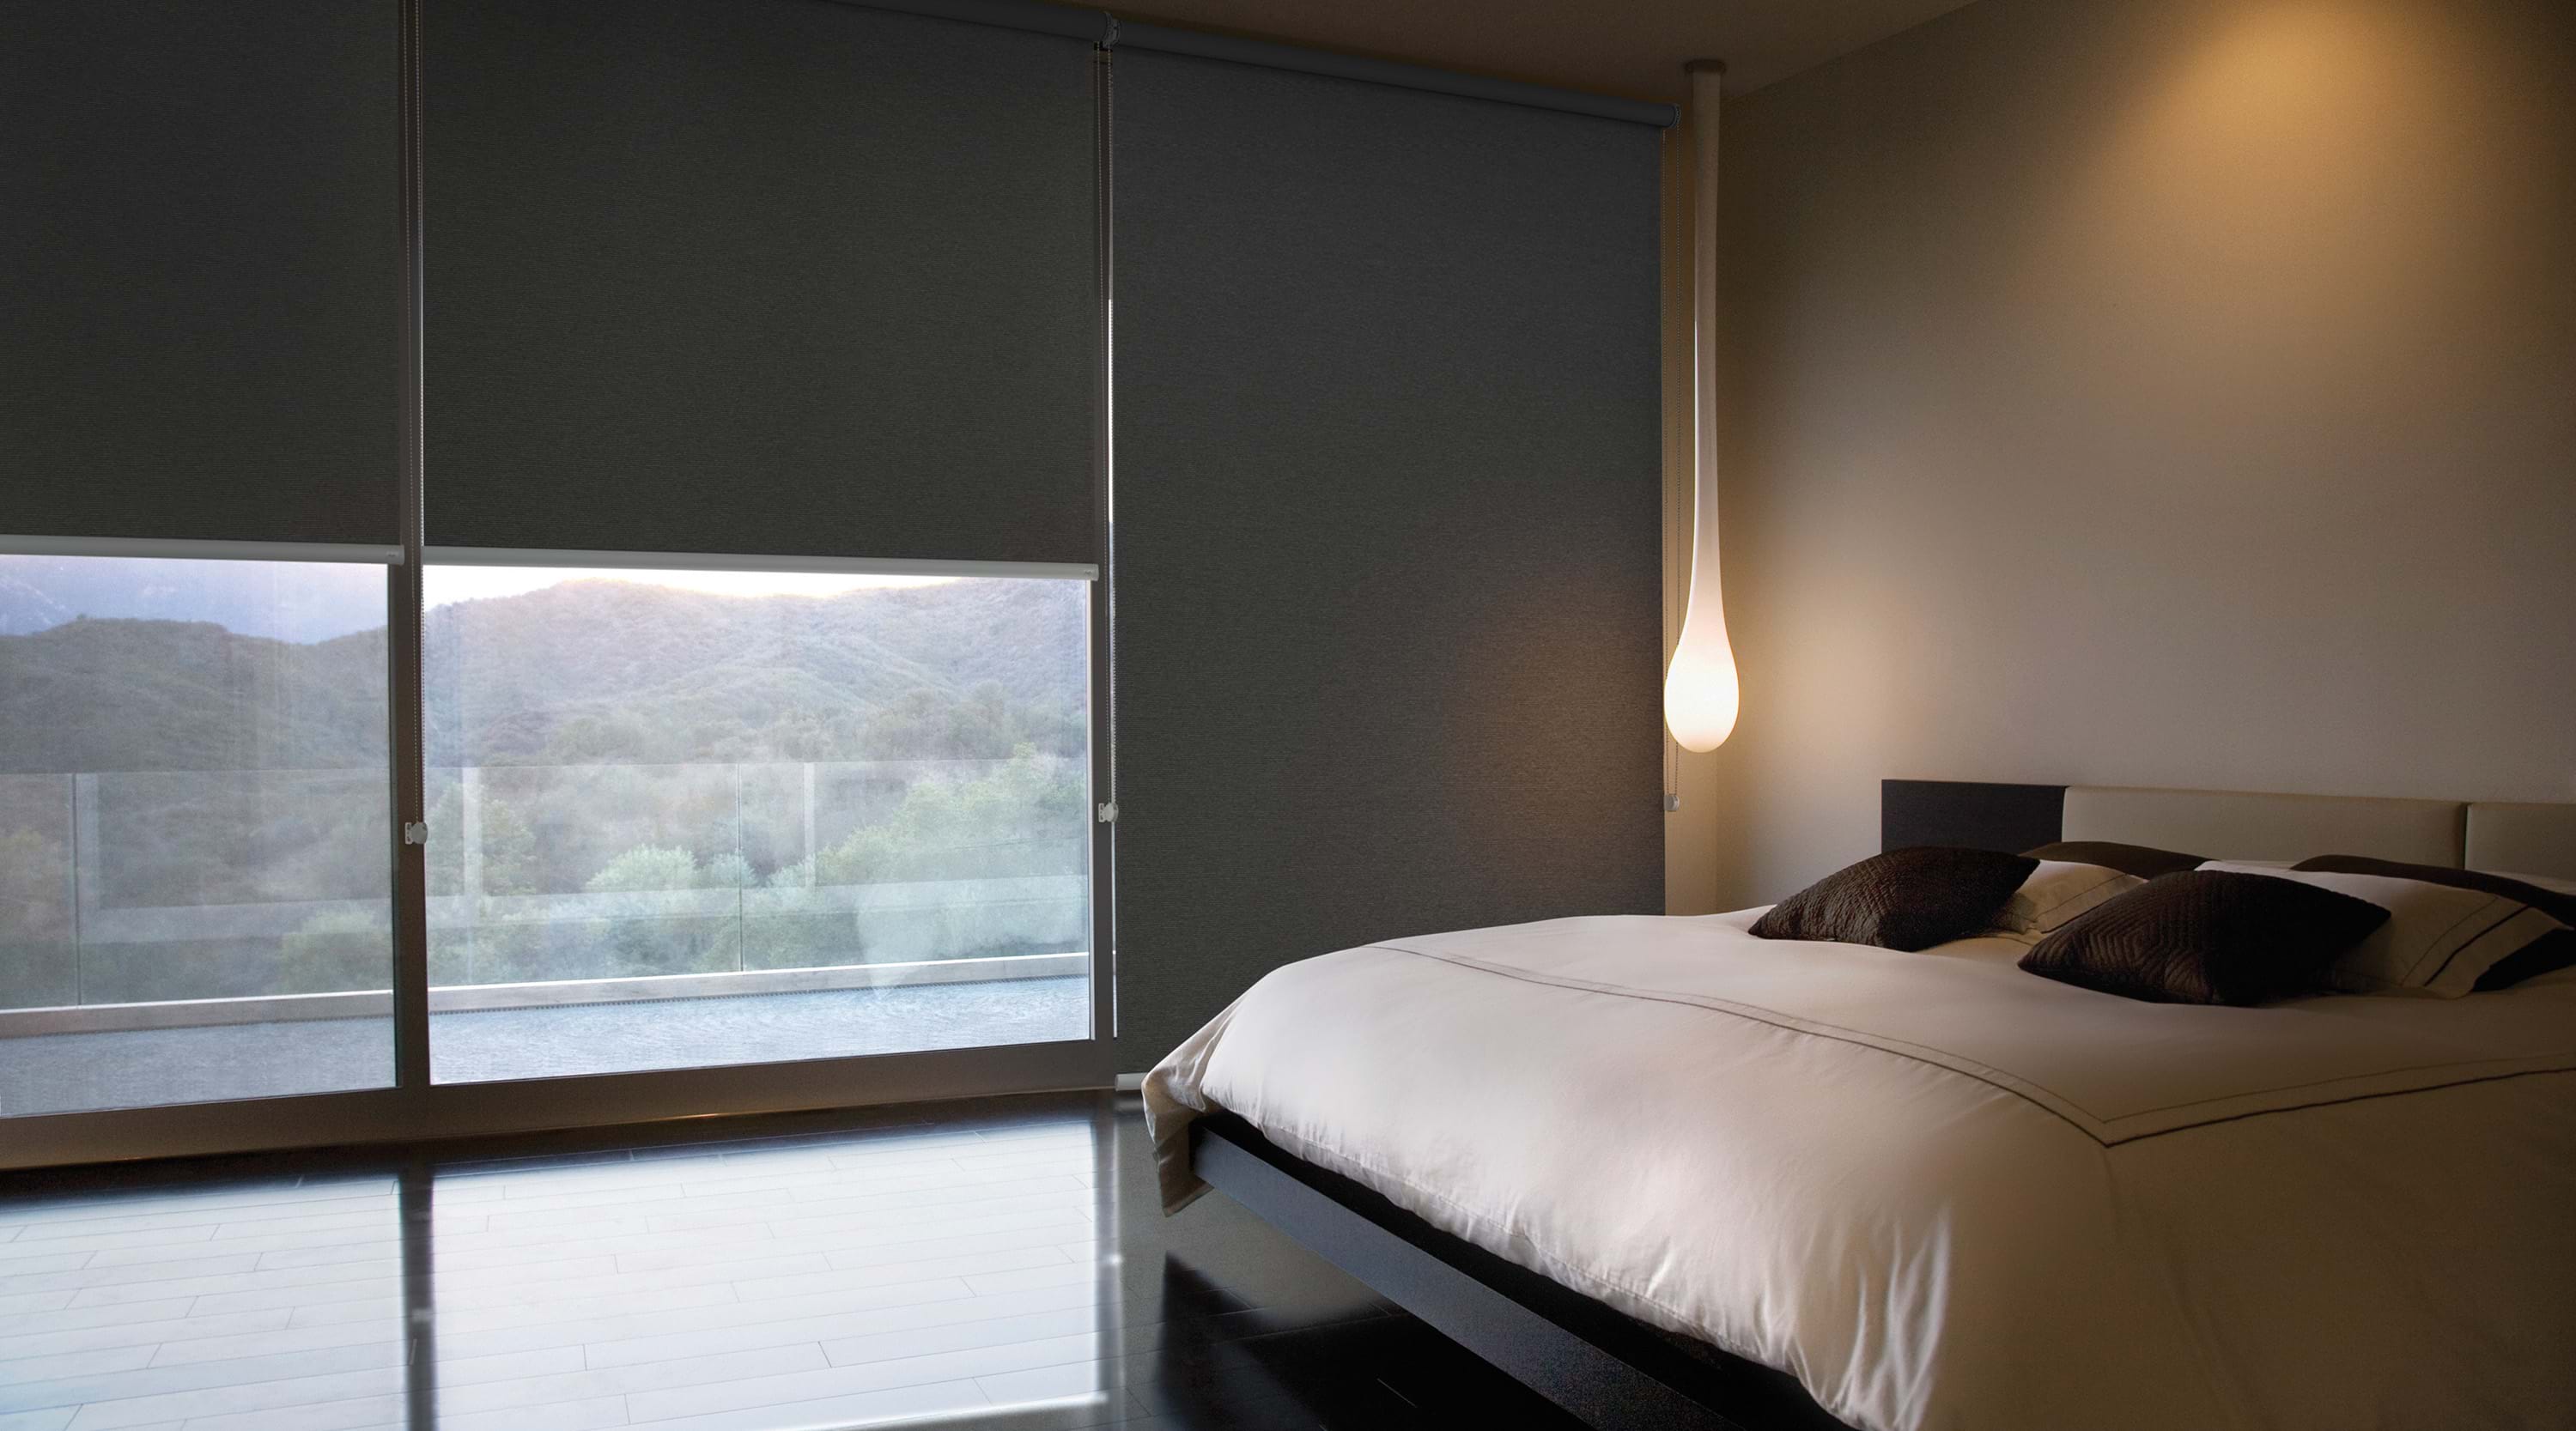 Blinds for bedrooms...(stop your yawning) Image